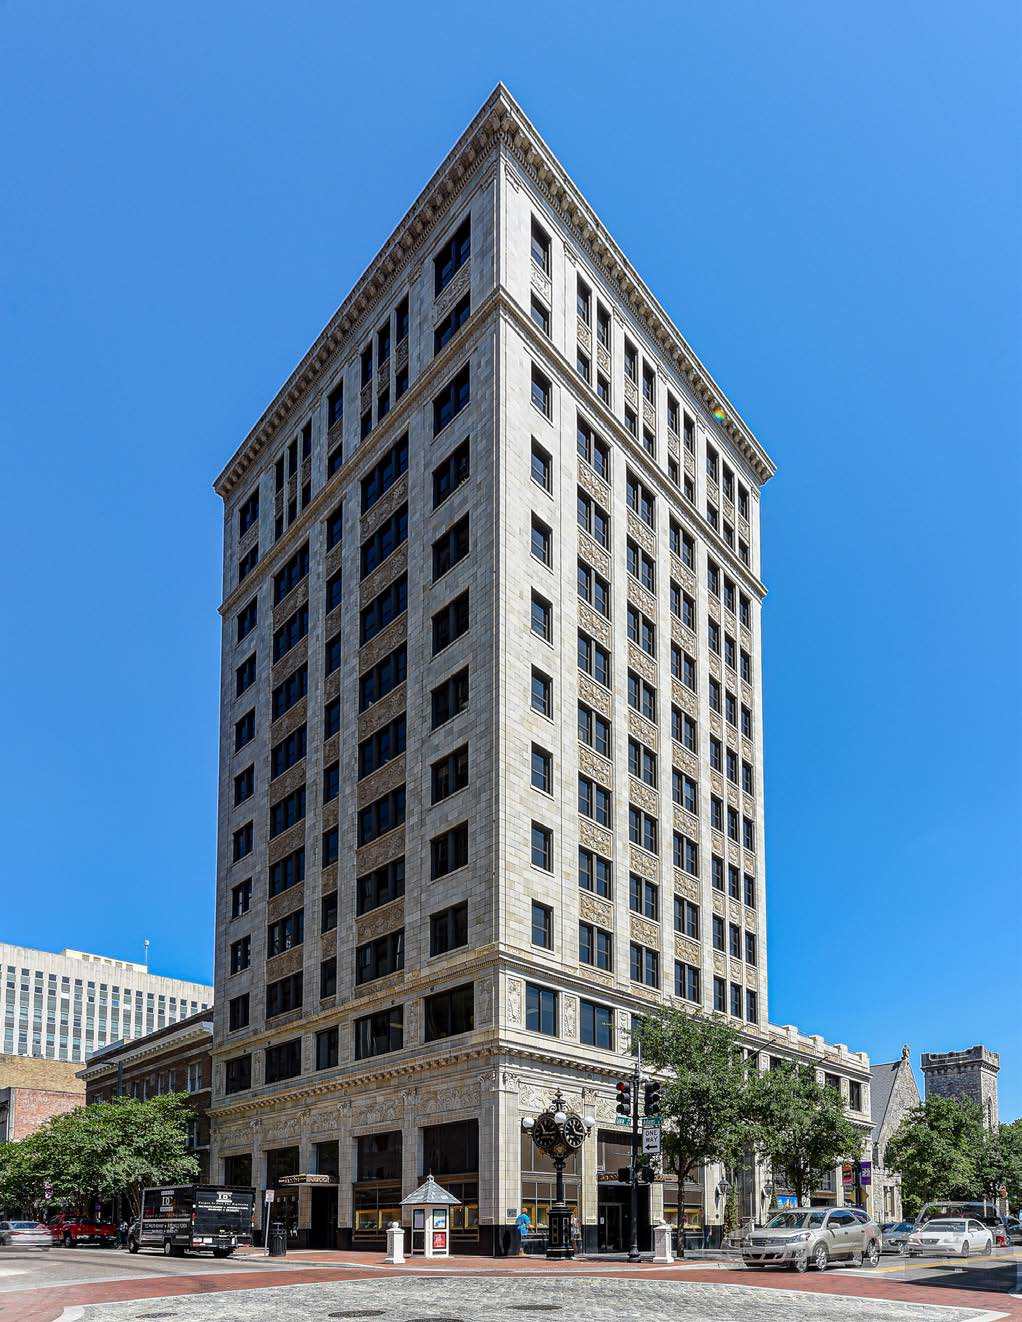 JWB Real Estate Capital paid $6.25 million for most of the building and $700,000 for the ninth floor of the 12-story building.